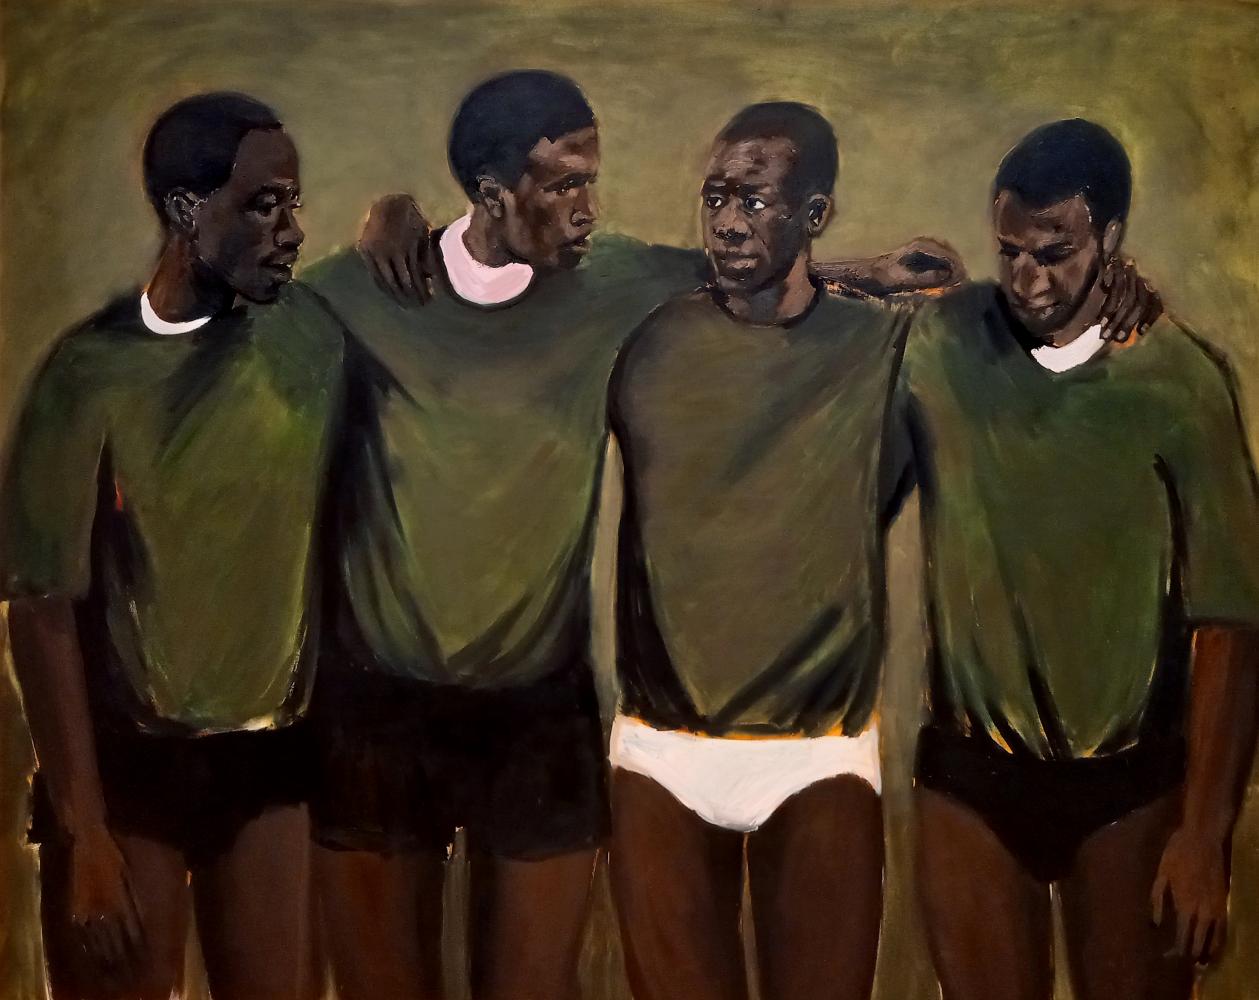 Lynette Yiadom-Boakye "Complication", 2013, Ausstellung "Fly In League With The Night", Tate Britain, 2021